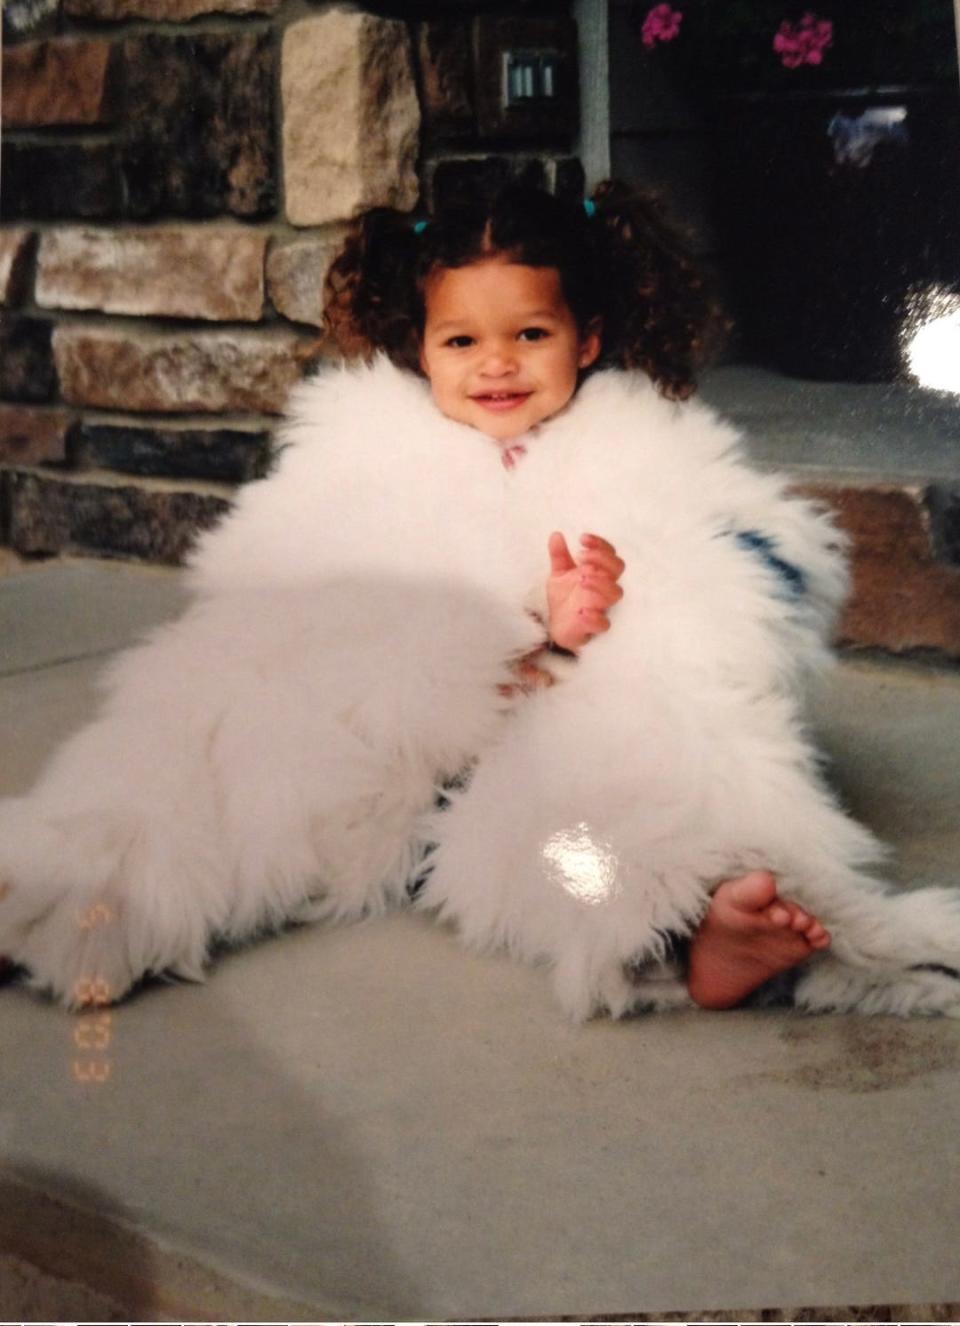 Sophia Smith, a longtime animal lover, once dressed up as a sheepdog for Halloween.